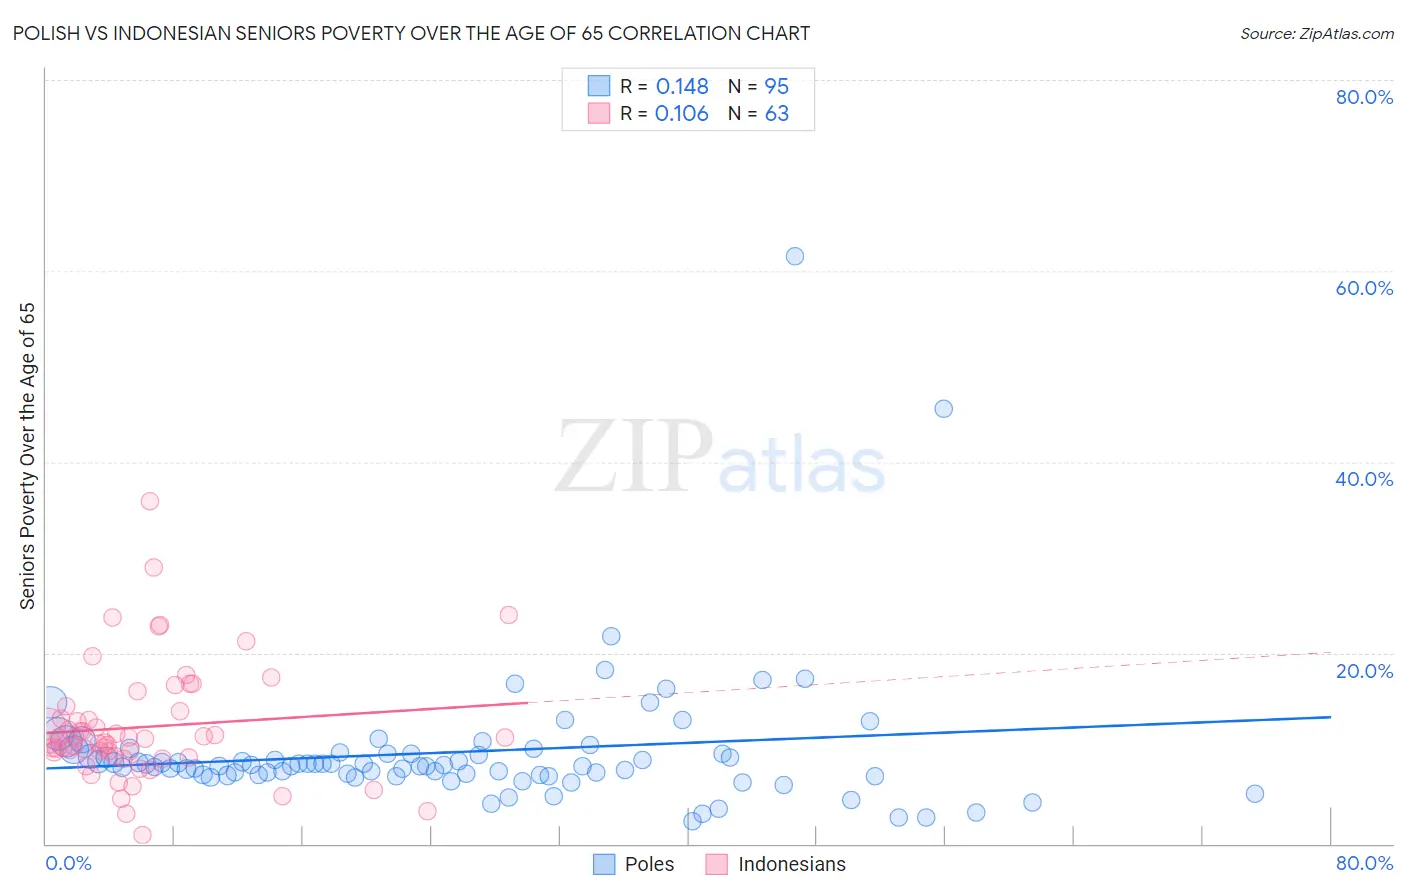 Polish vs Indonesian Seniors Poverty Over the Age of 65